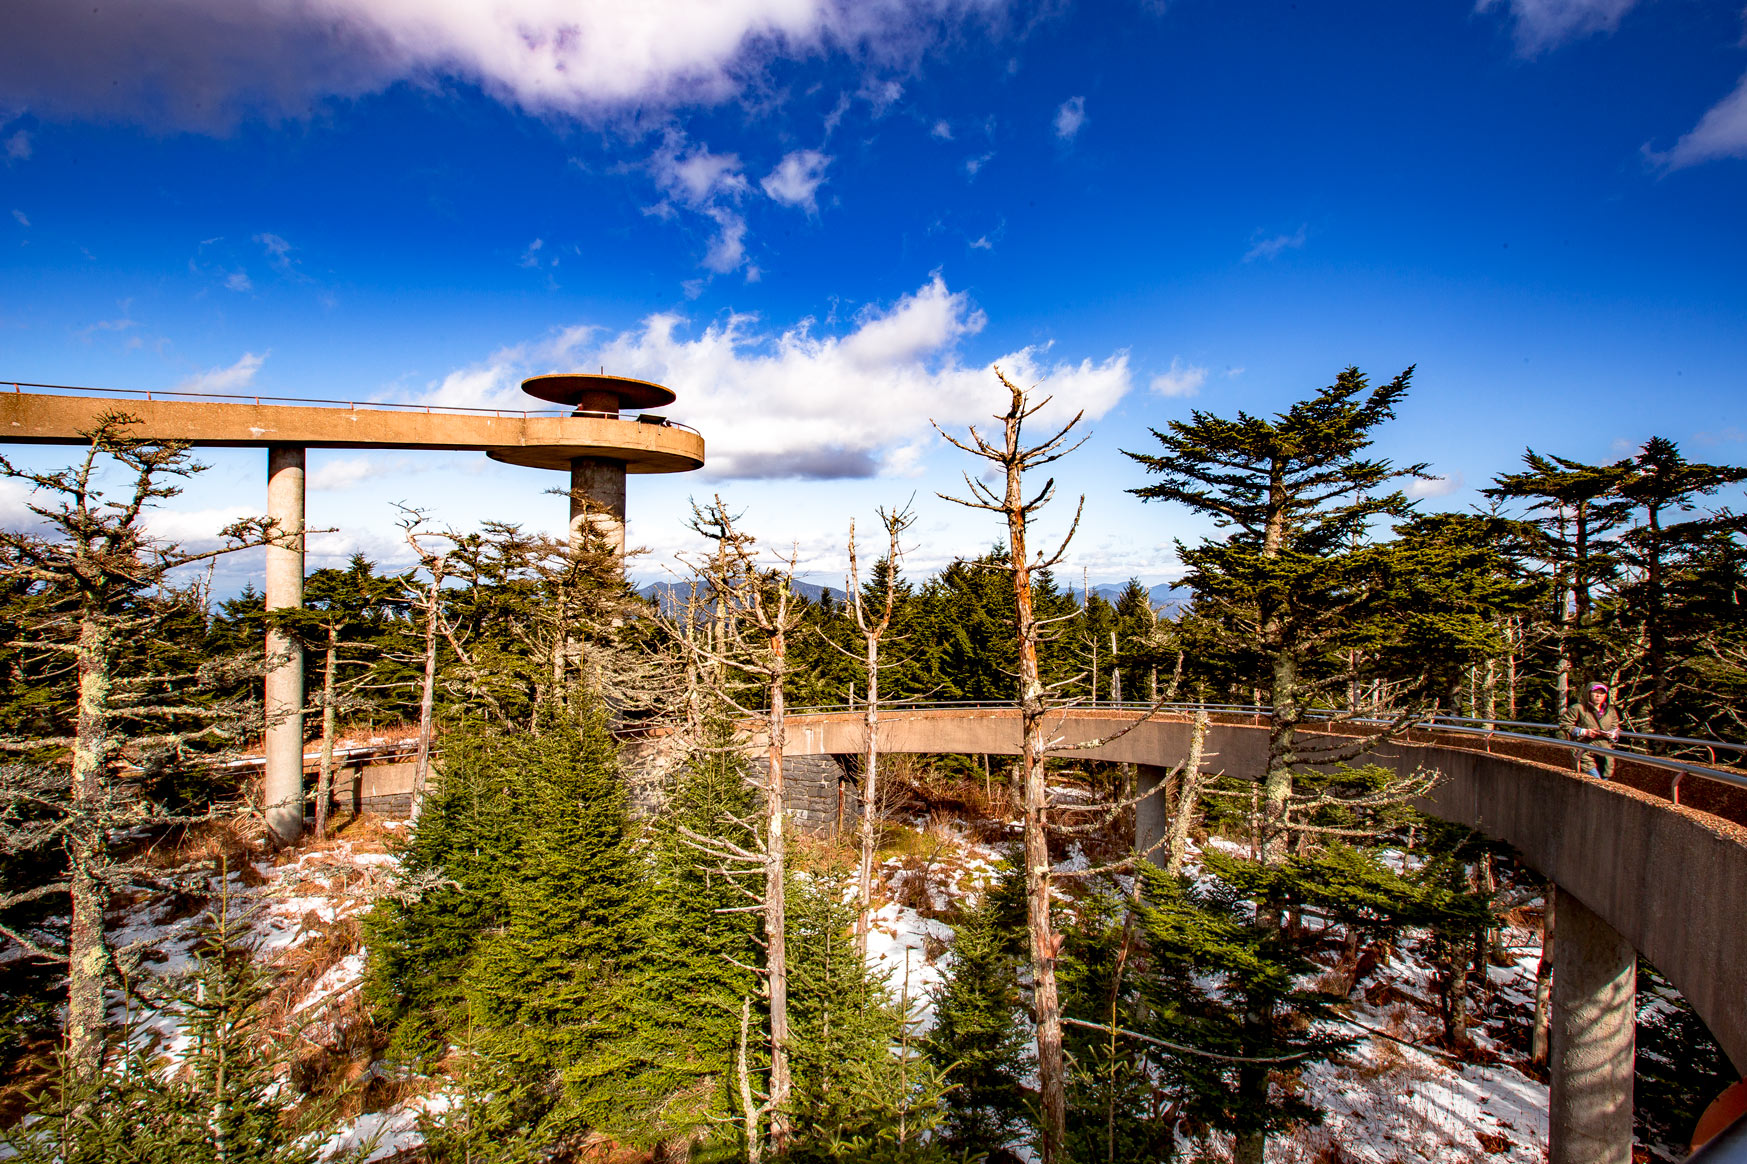 clingmans dome Tennessee National Parks